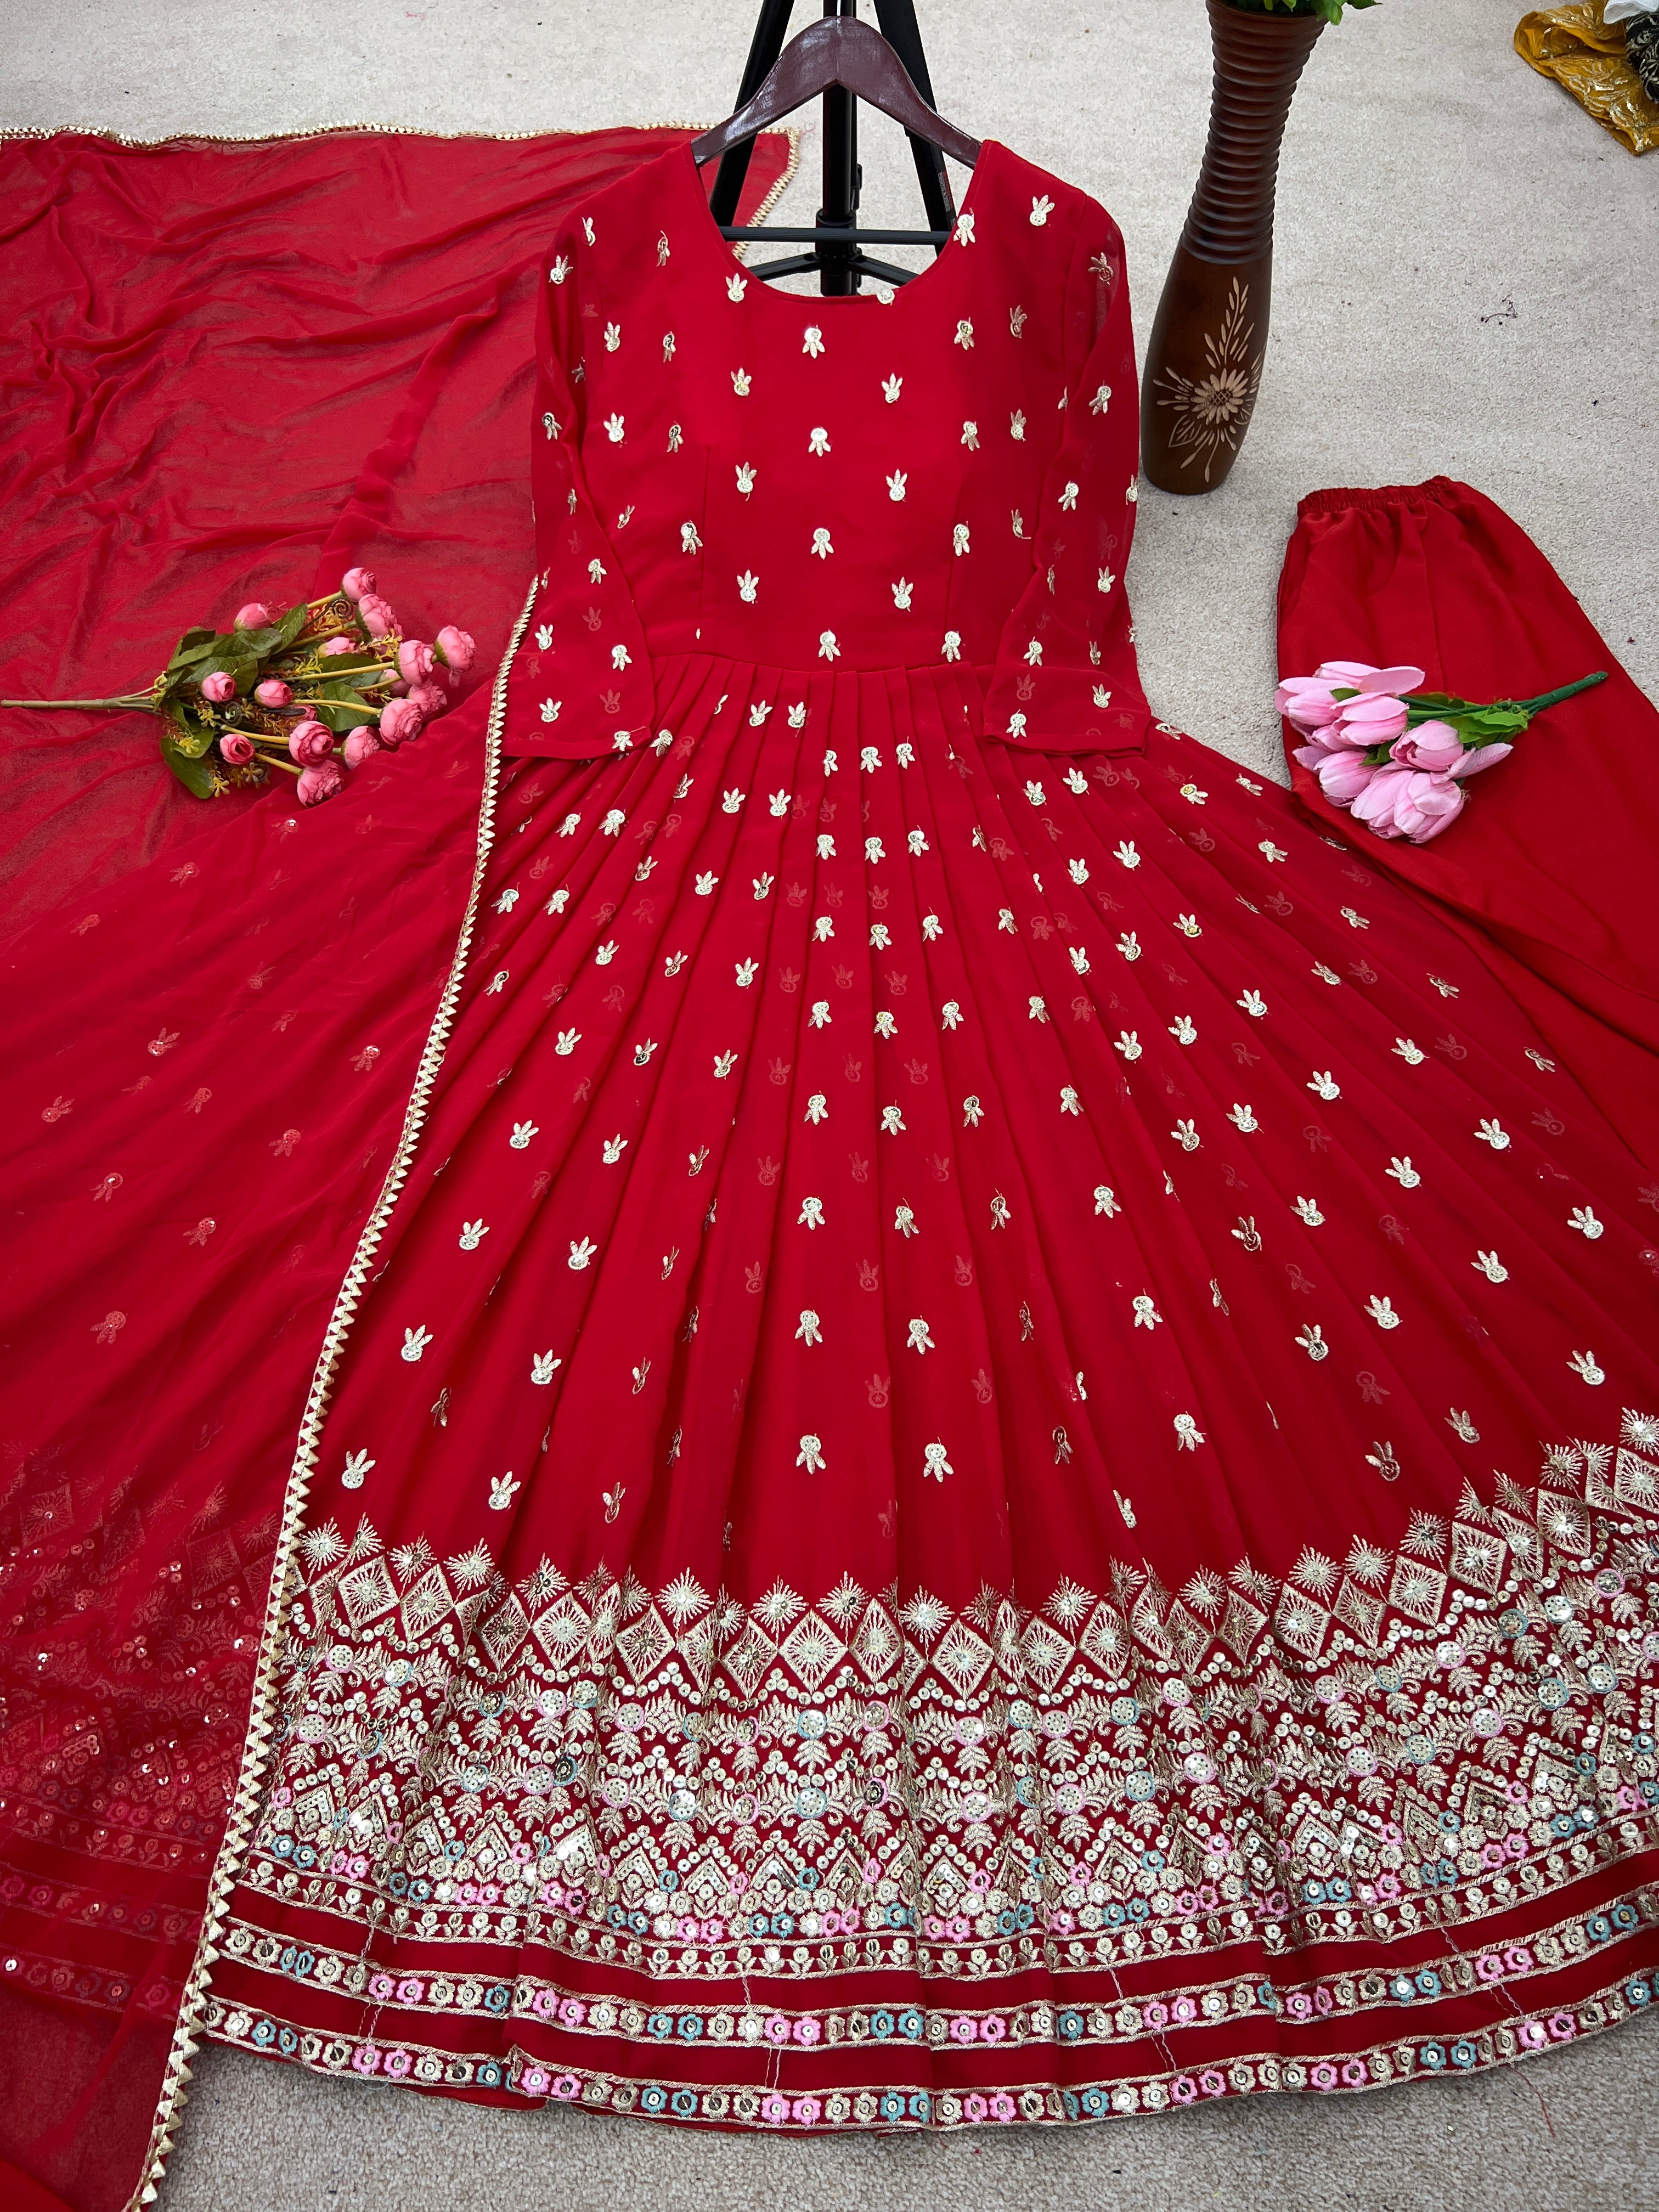 Marvelous Red Color Thread Embroidery Work Gown